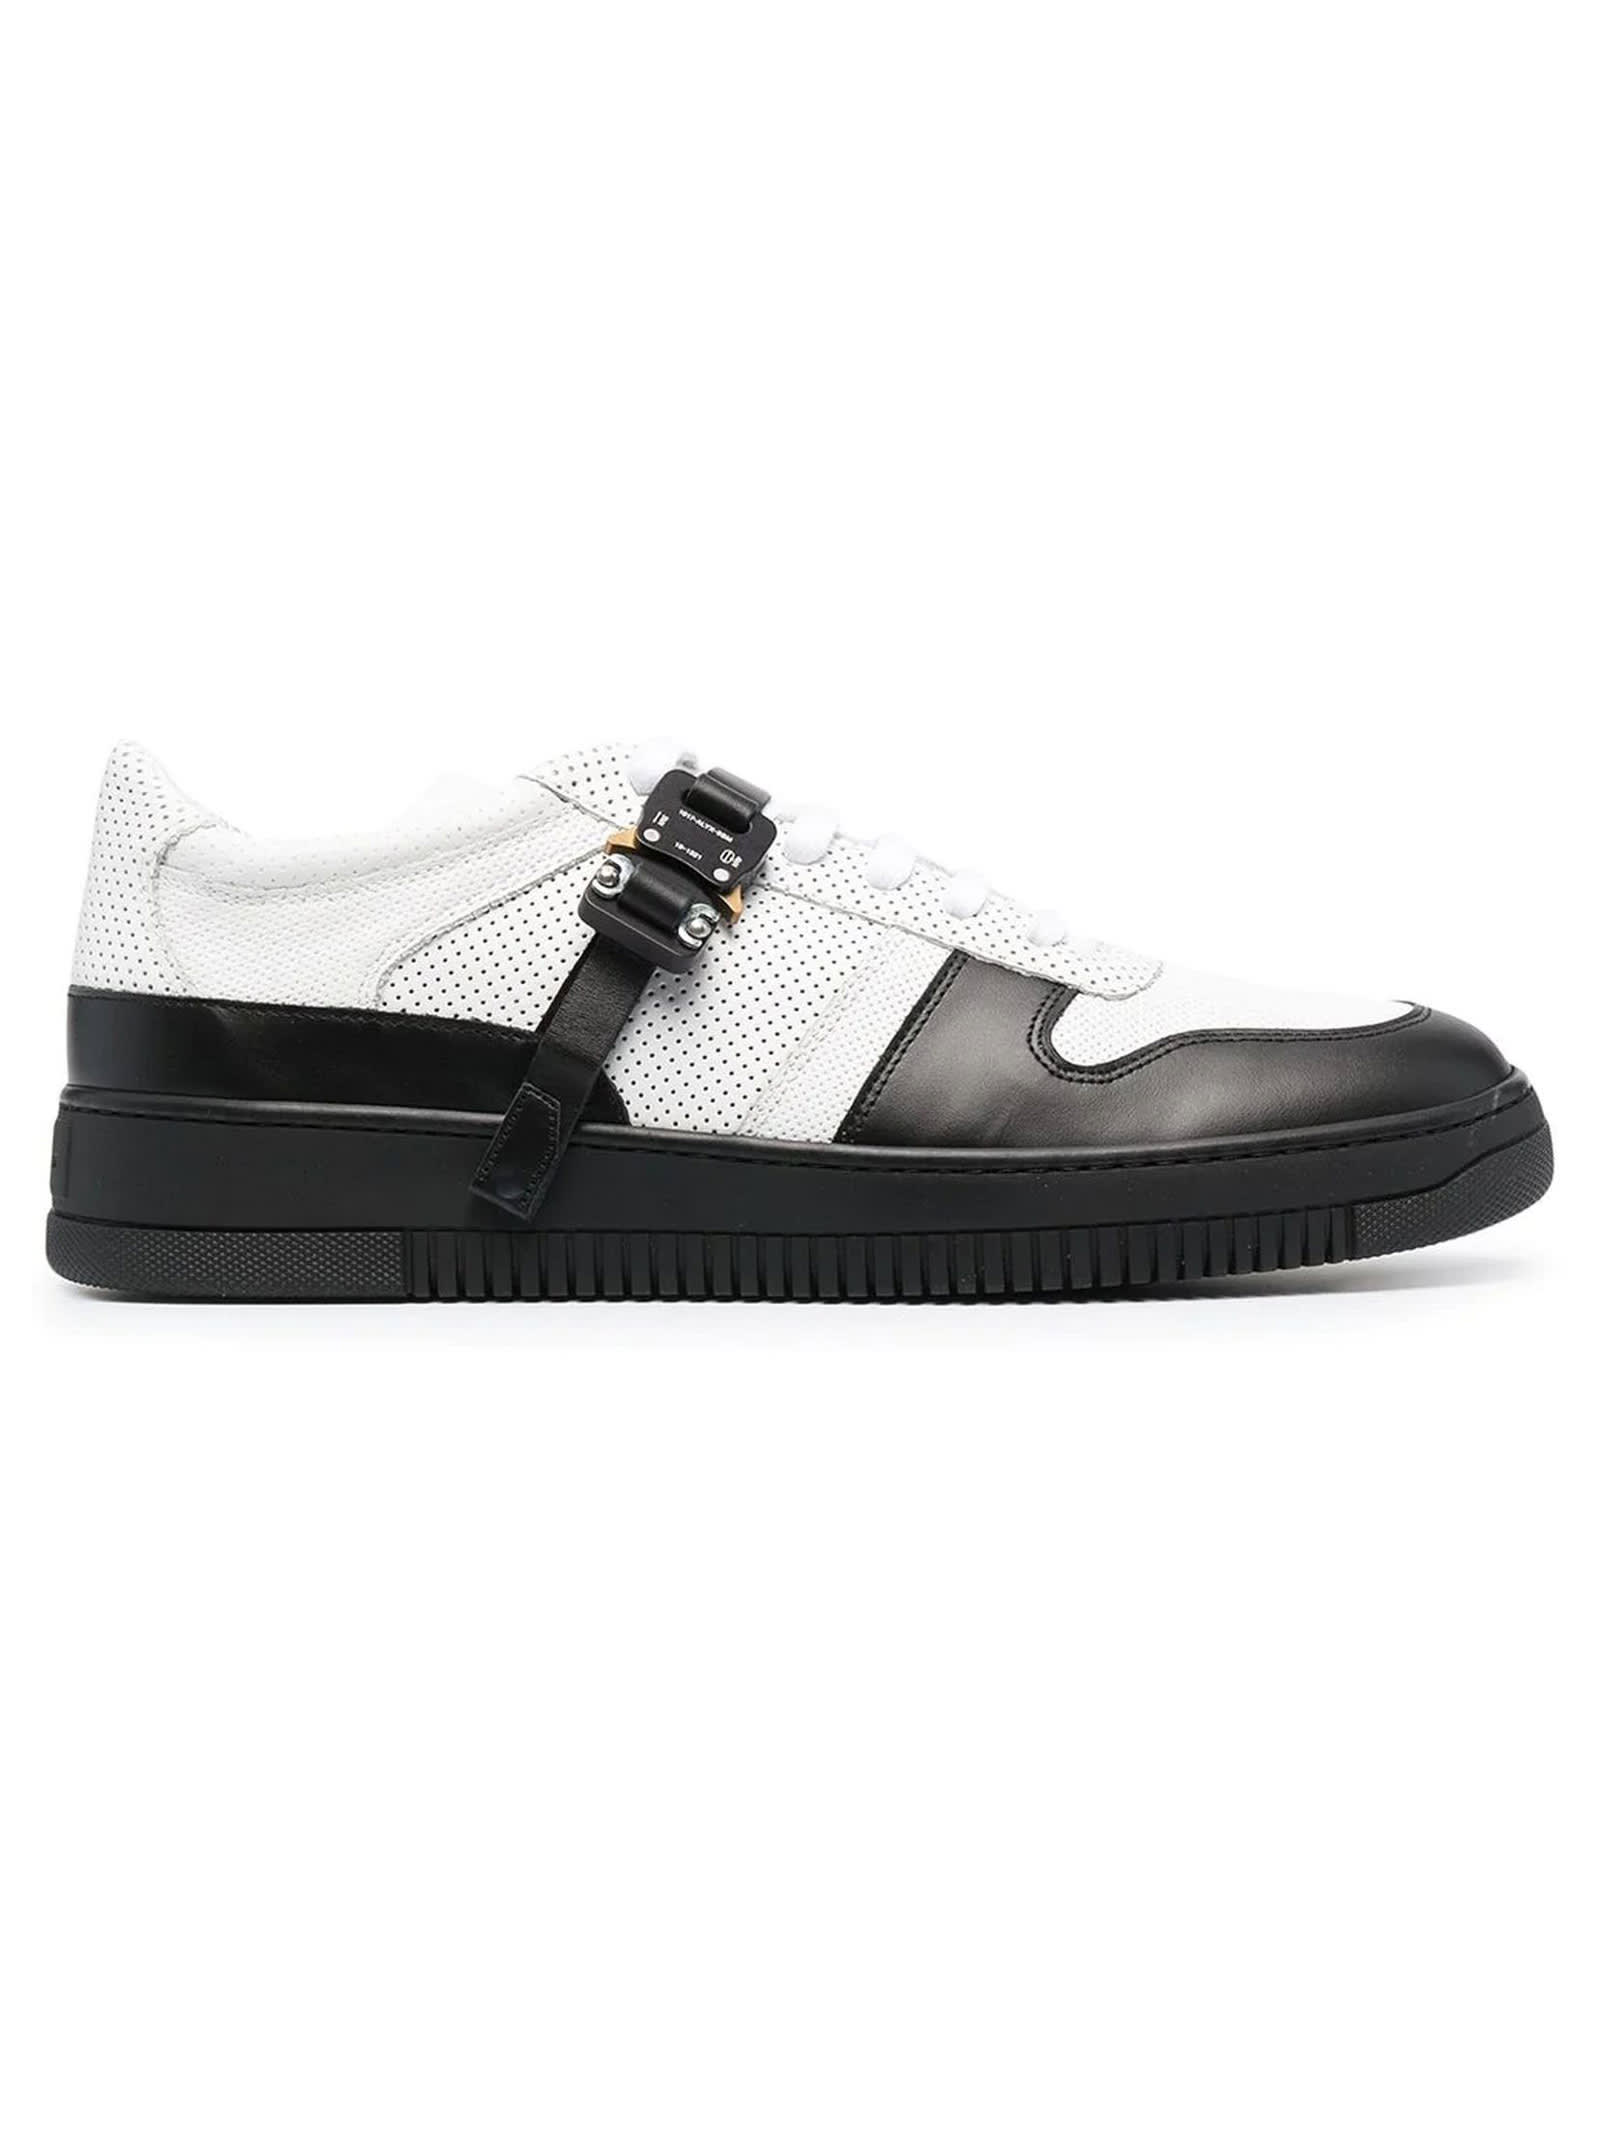 1017 ALYX 9SM White And Black Leather Sneakers